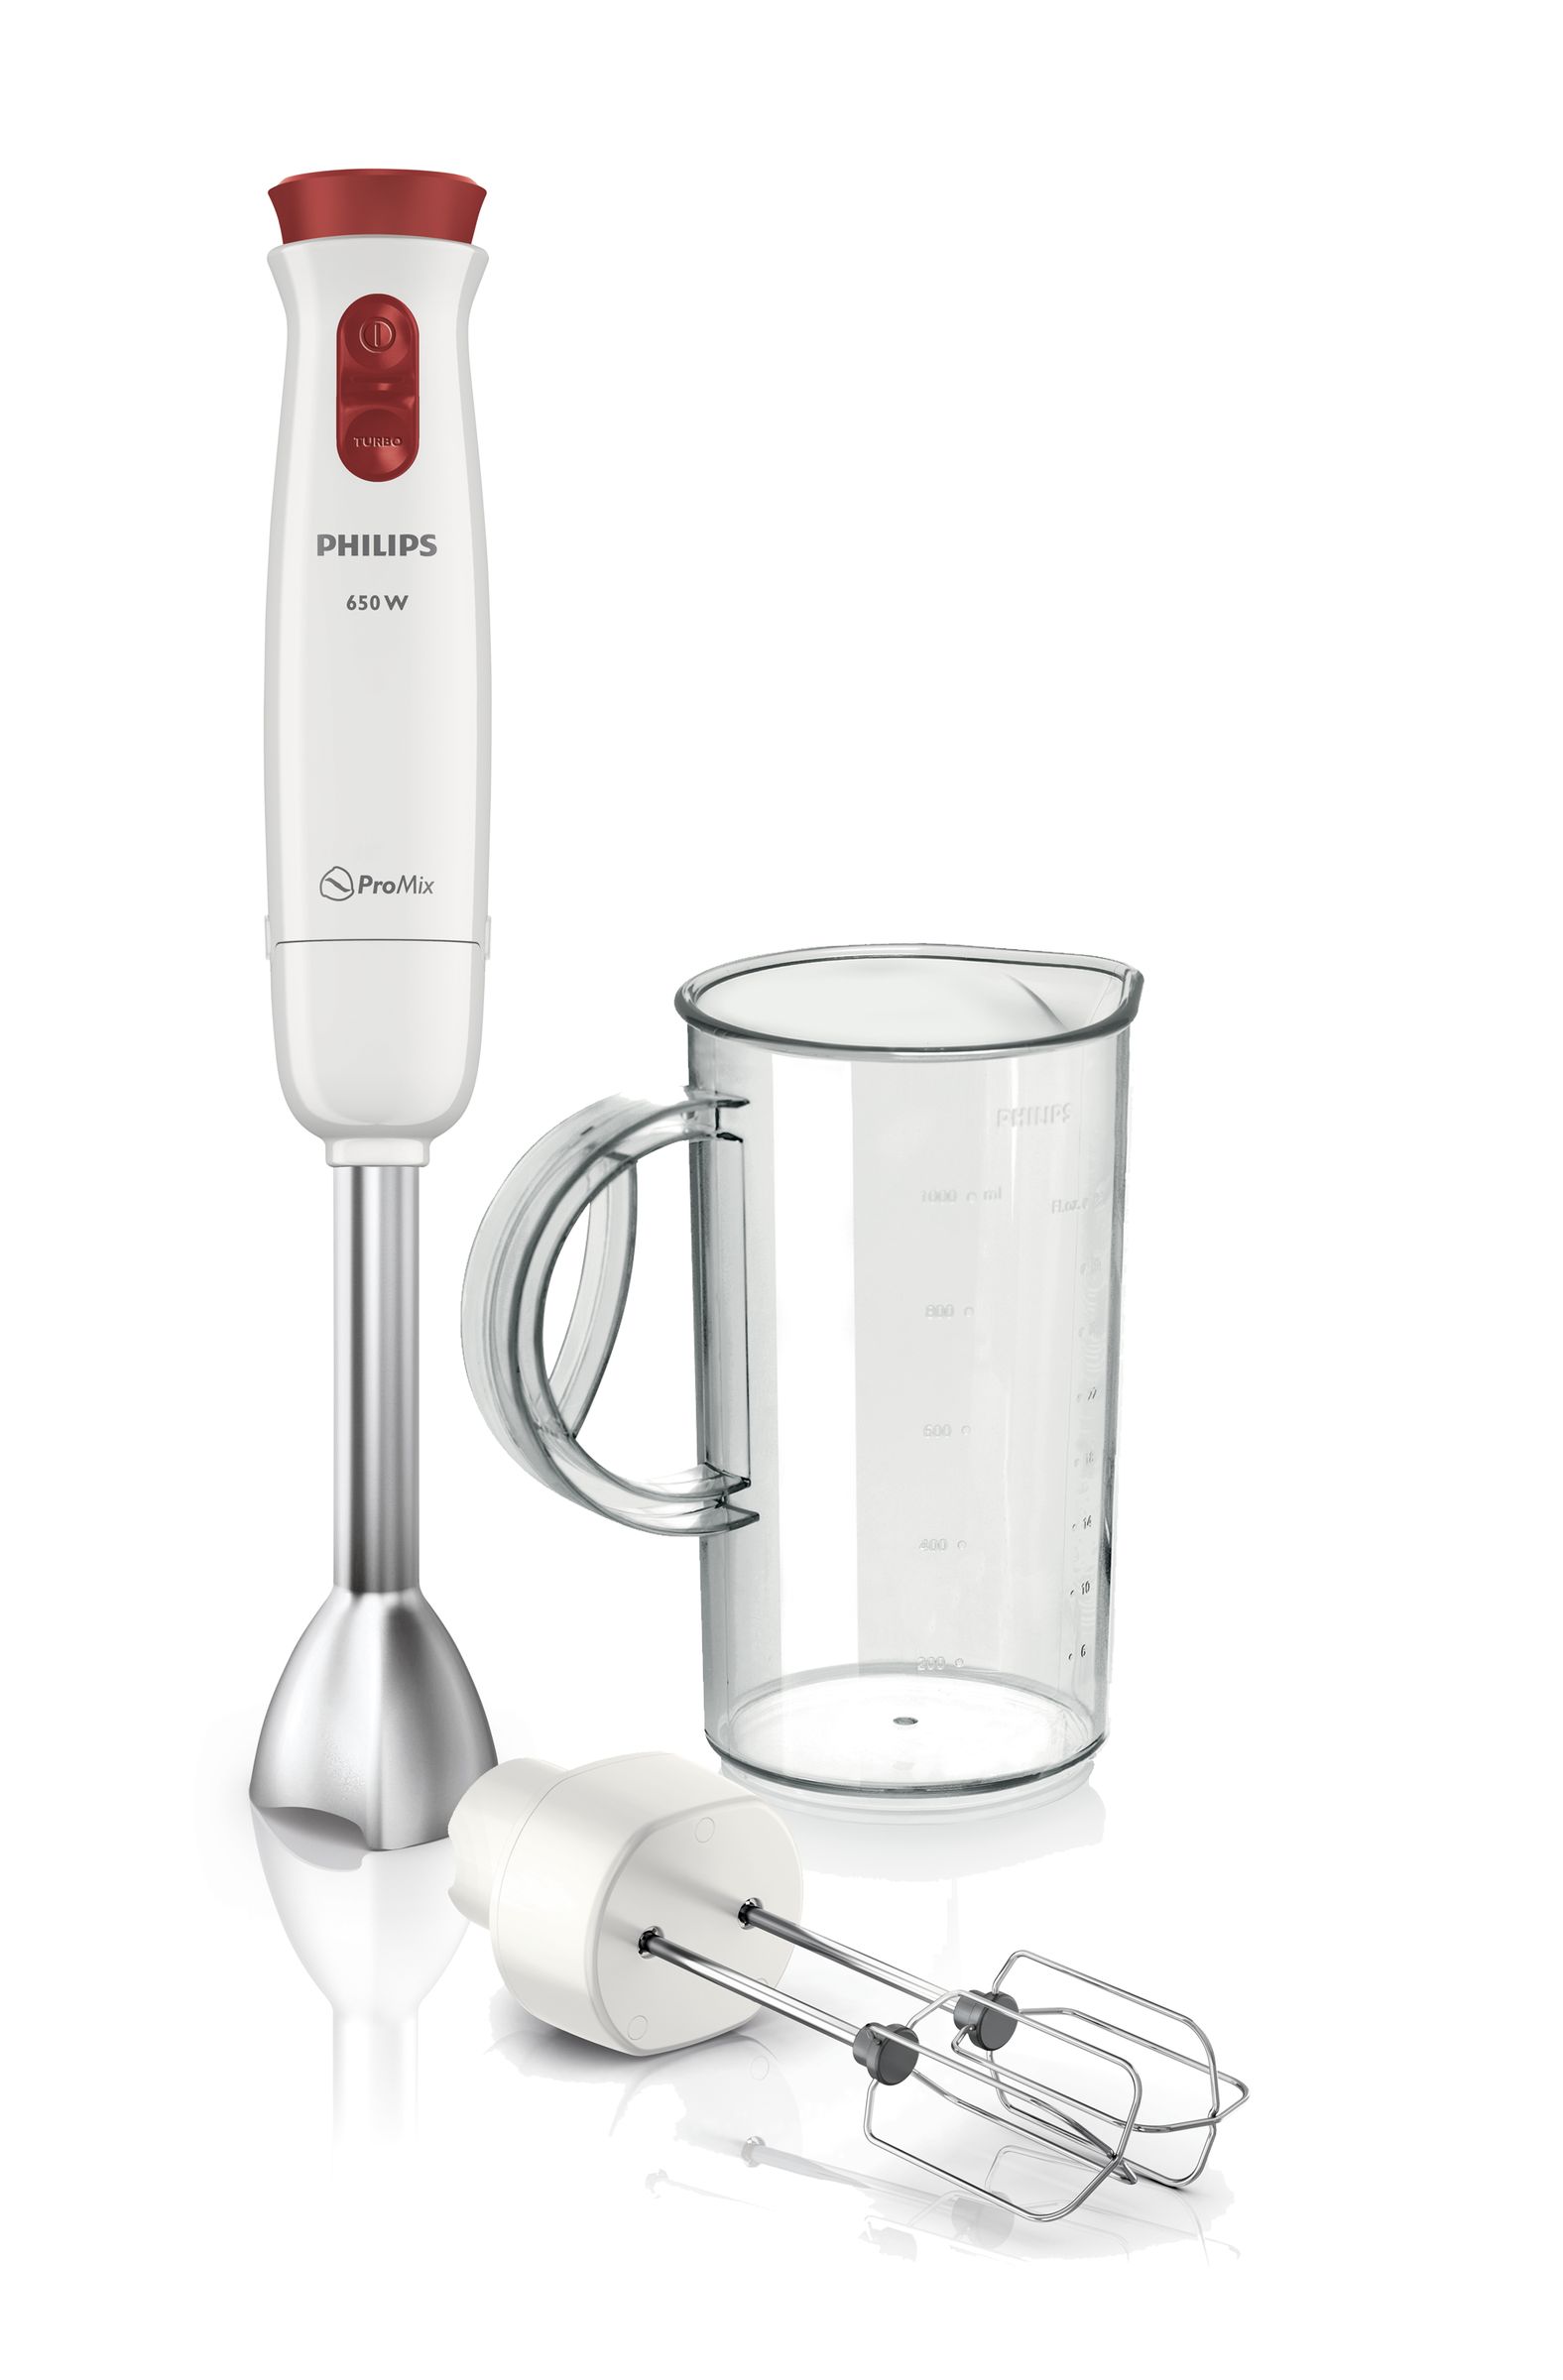 Philips Glass Mixer Carrefour